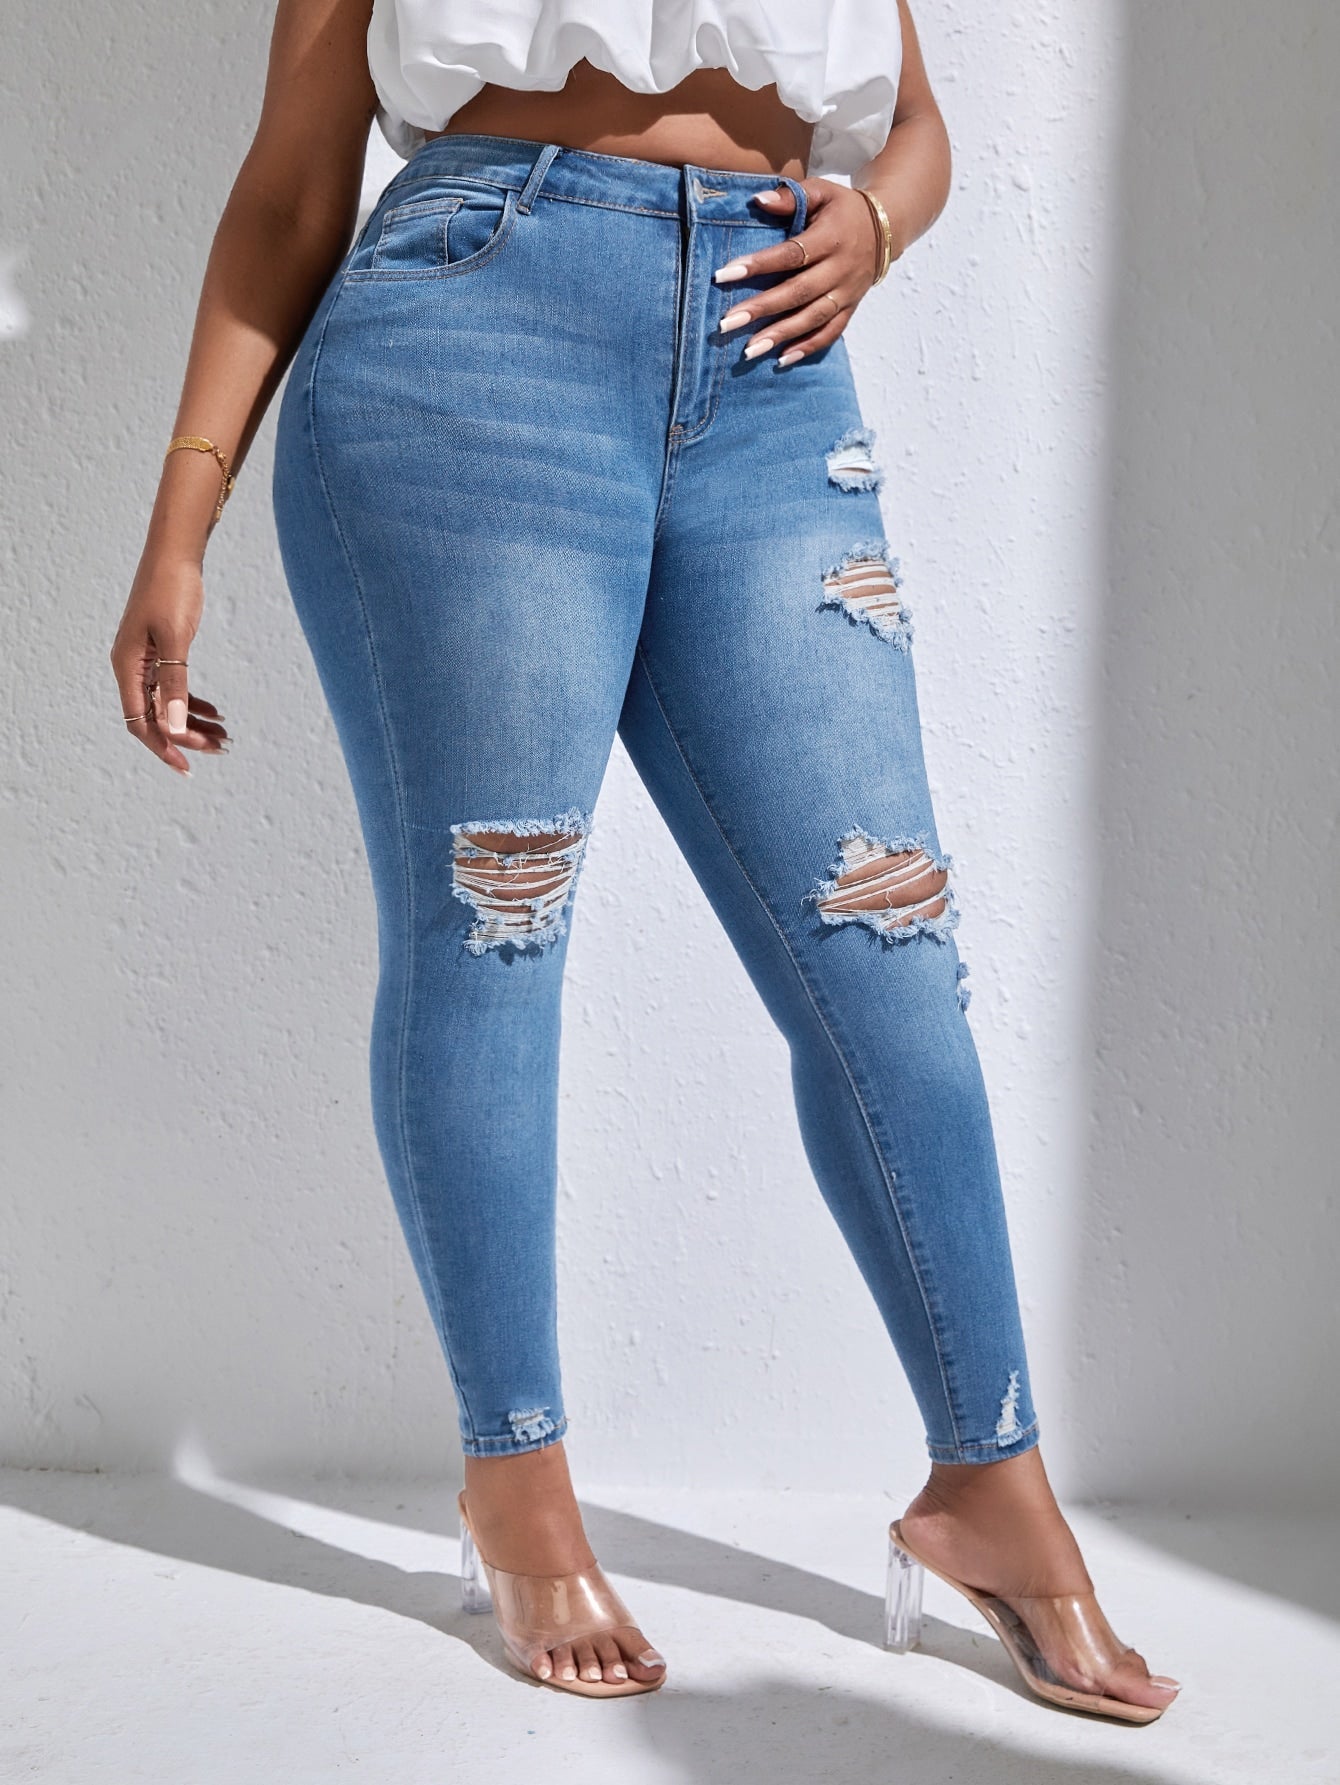 Plussize Schmale Jeans mit Riss, hoher Taille